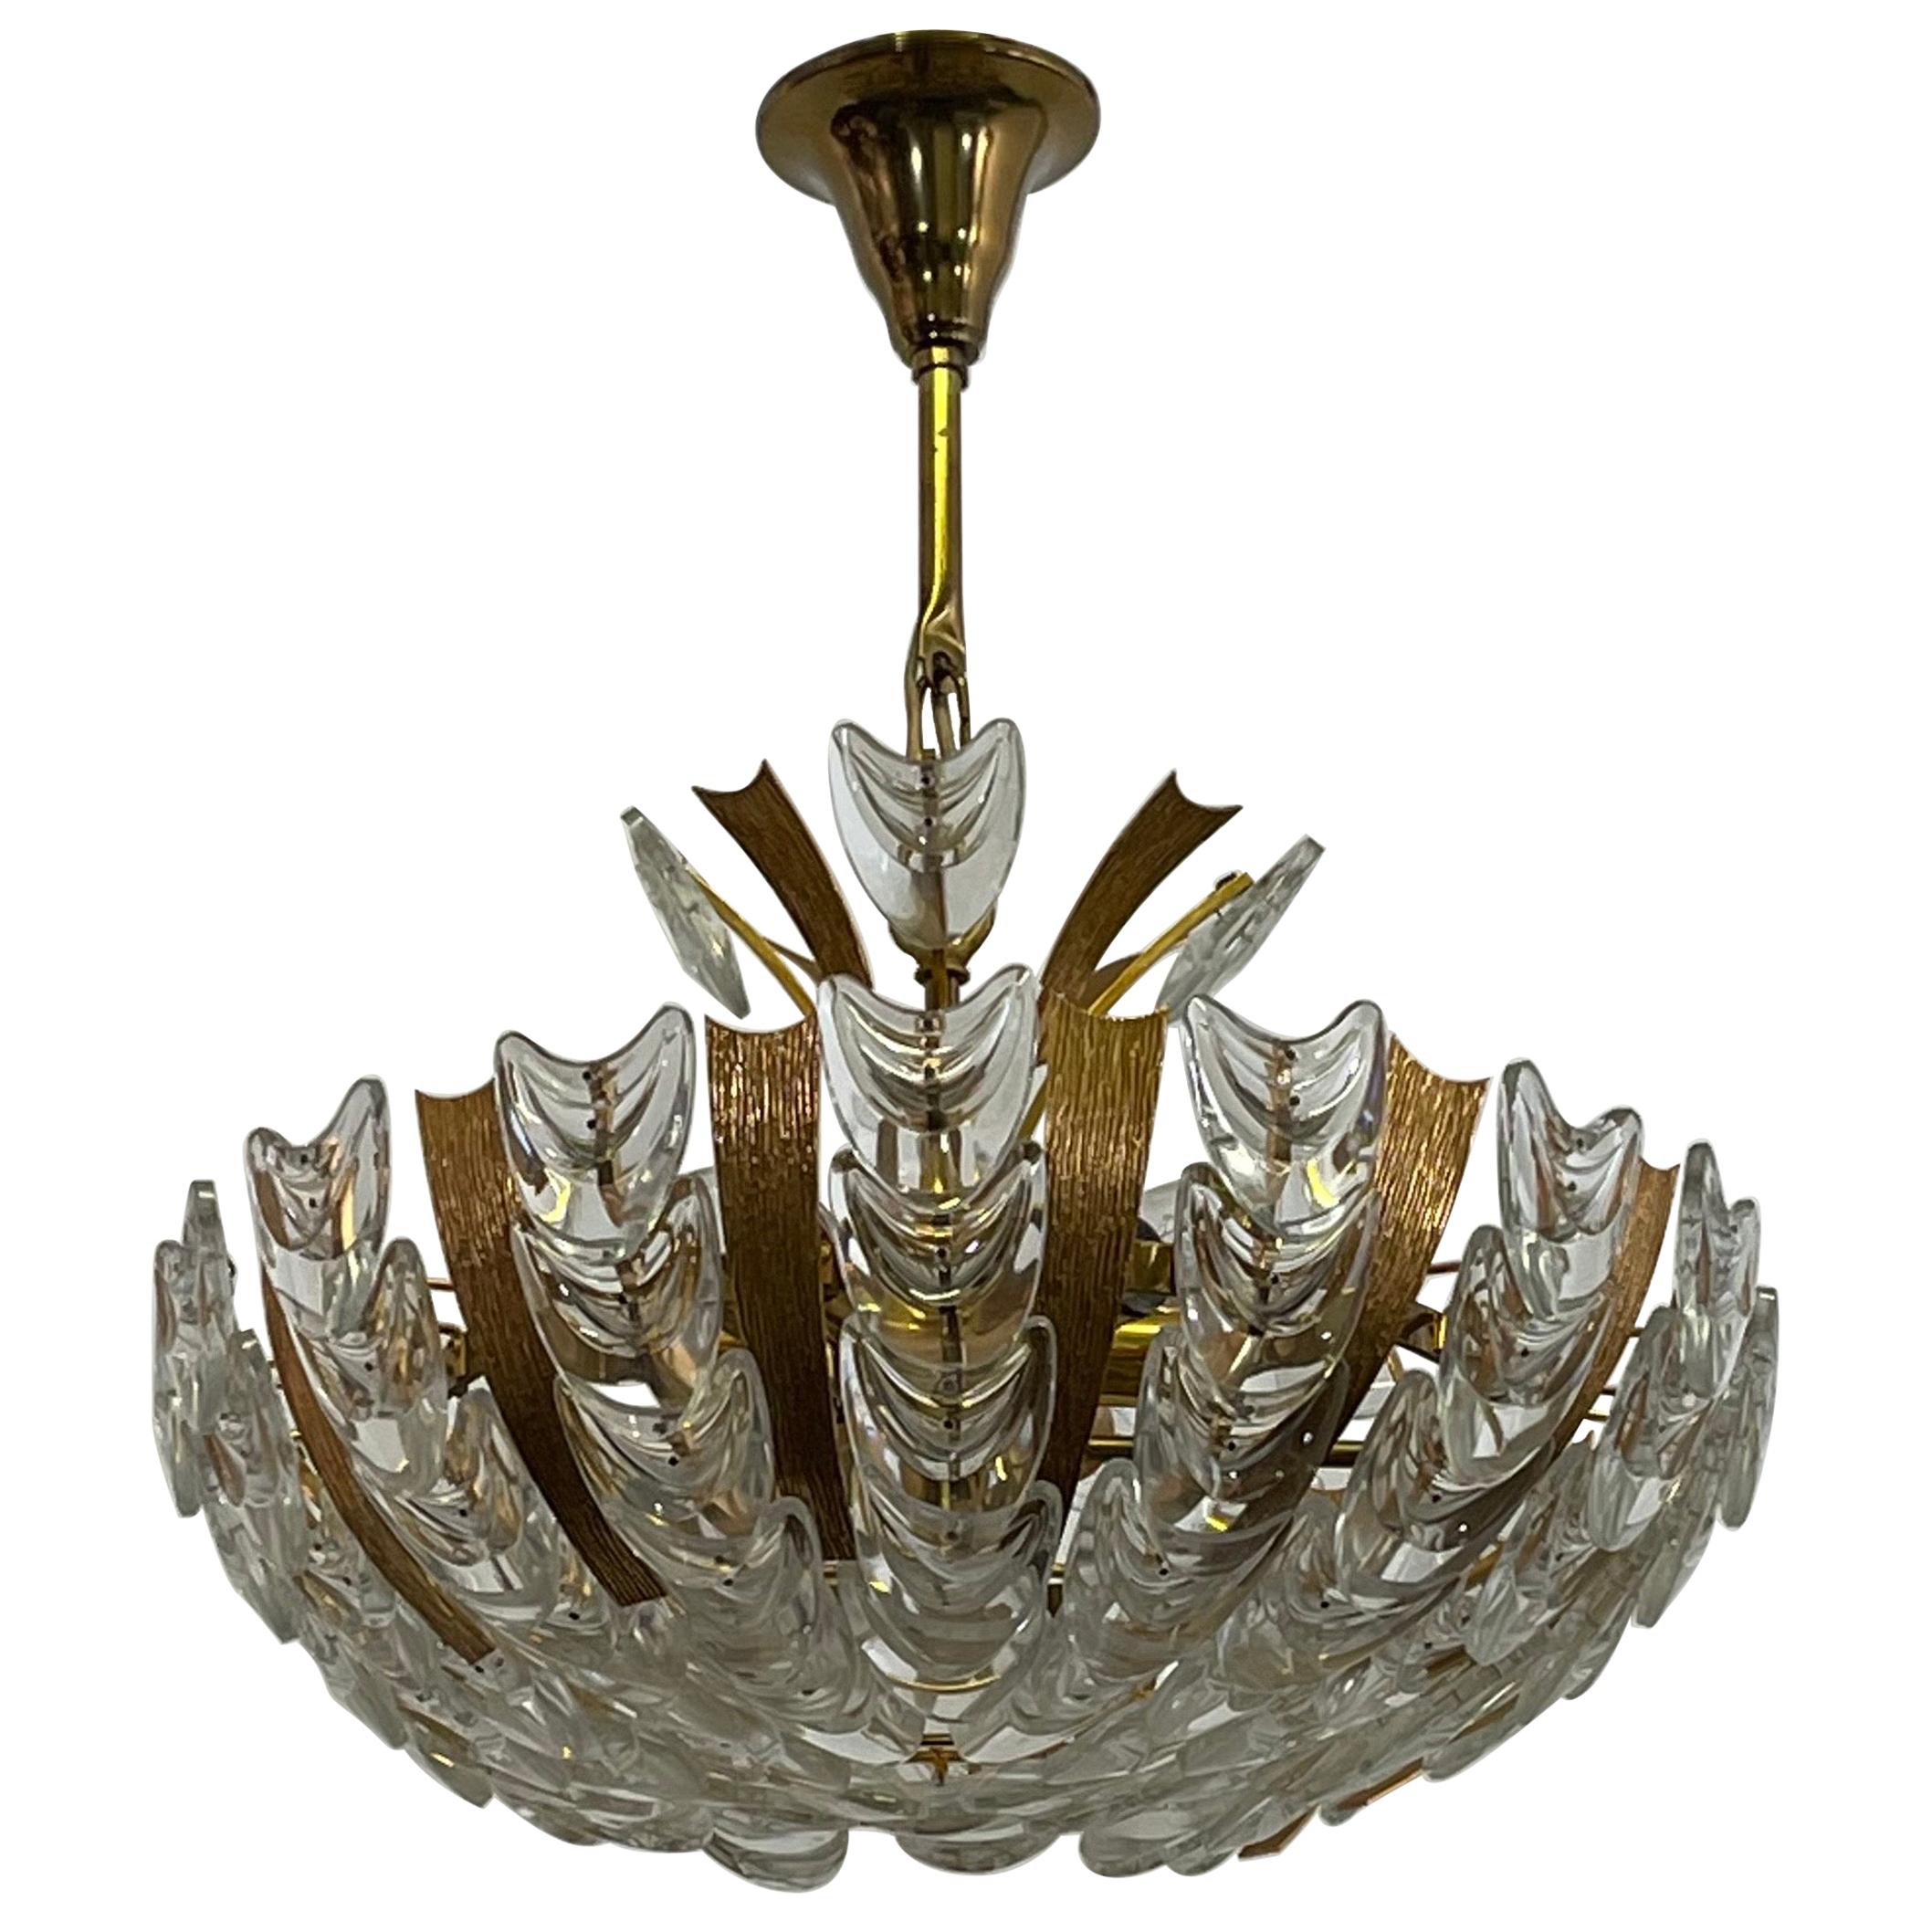 Rare Gilt Brass and Glass Chandelier by Palwa, circa 1960s